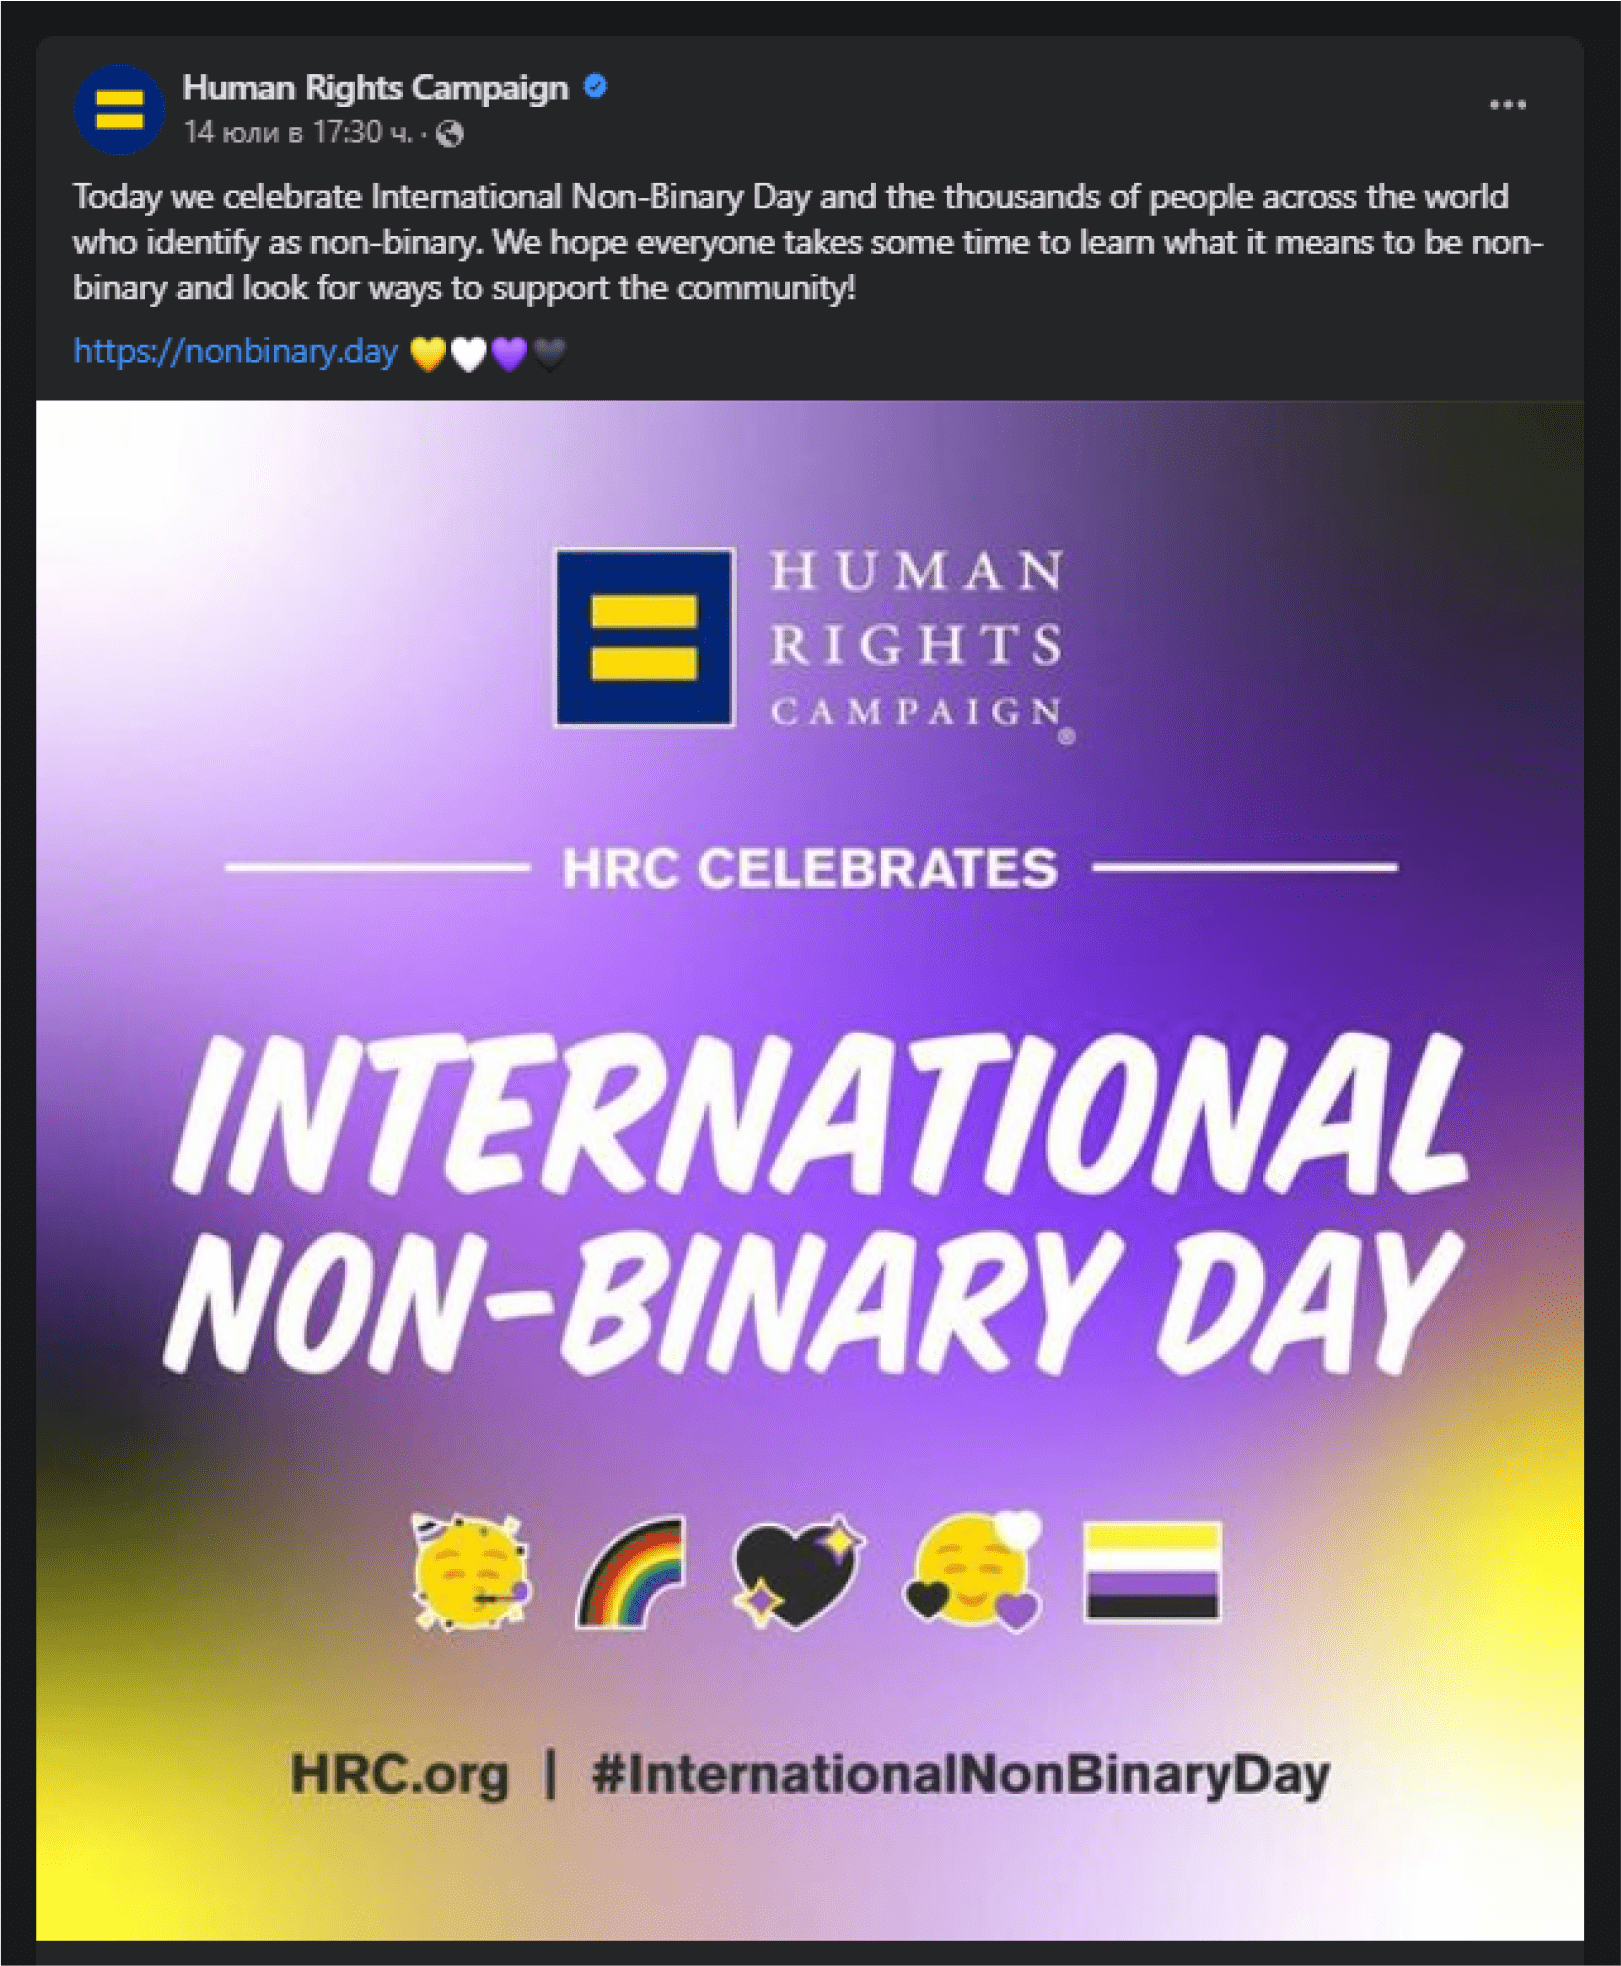 Human Rights Campaign Facebook post celebrating International Non-Binary Day, advocating for non-binary awareness and community support.